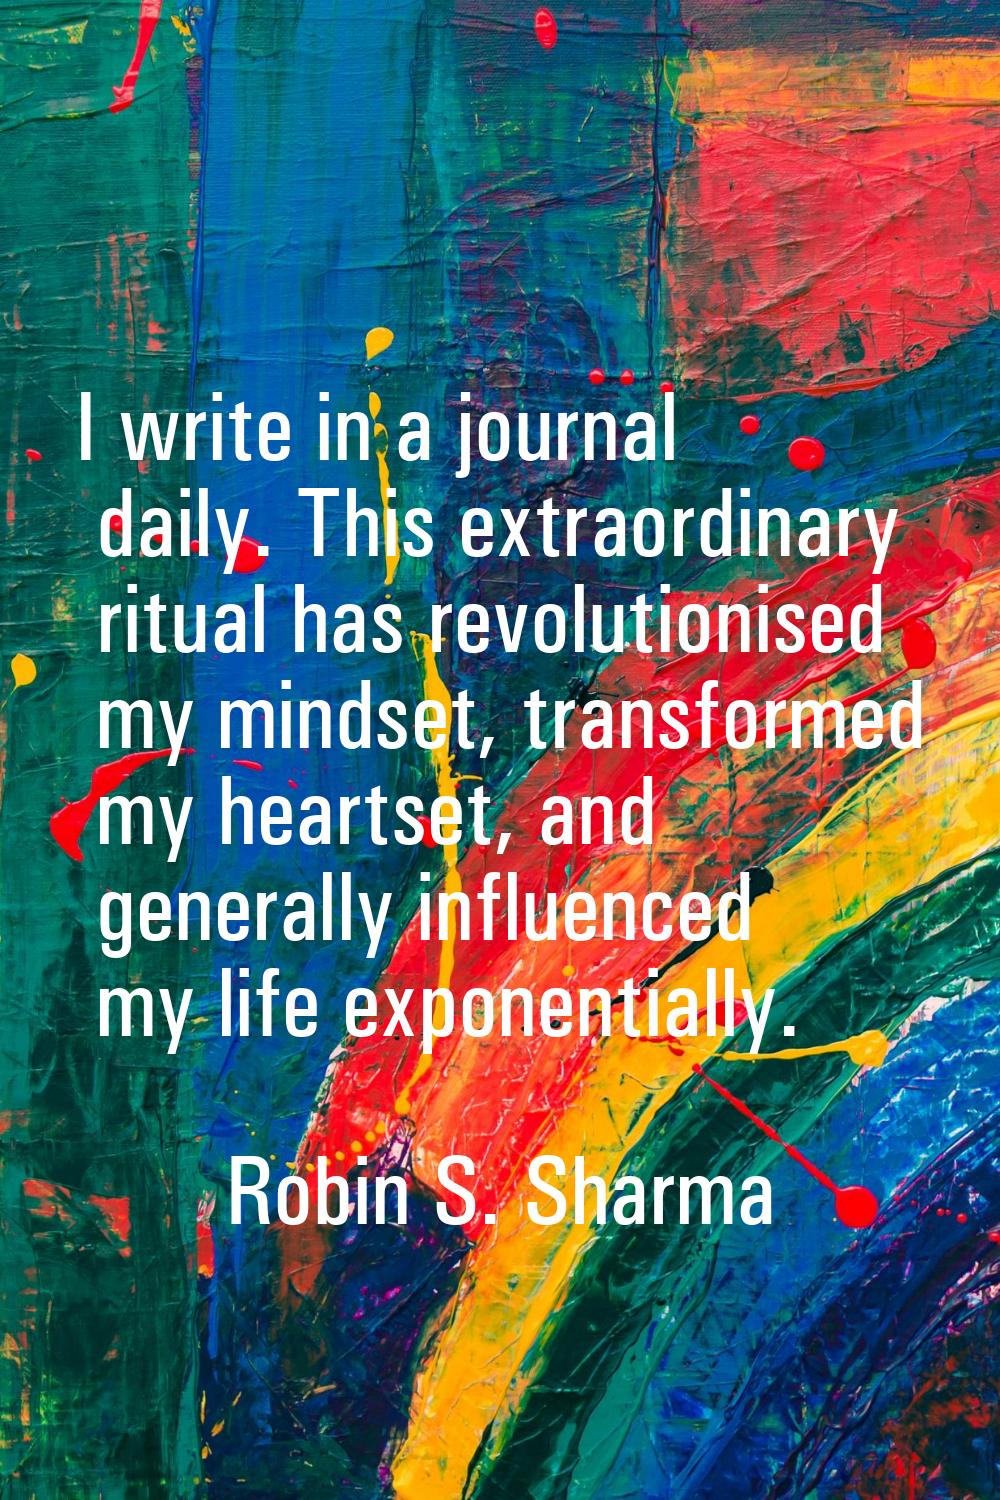 I write in a journal daily. This extraordinary ritual has revolutionised my mindset, transformed my